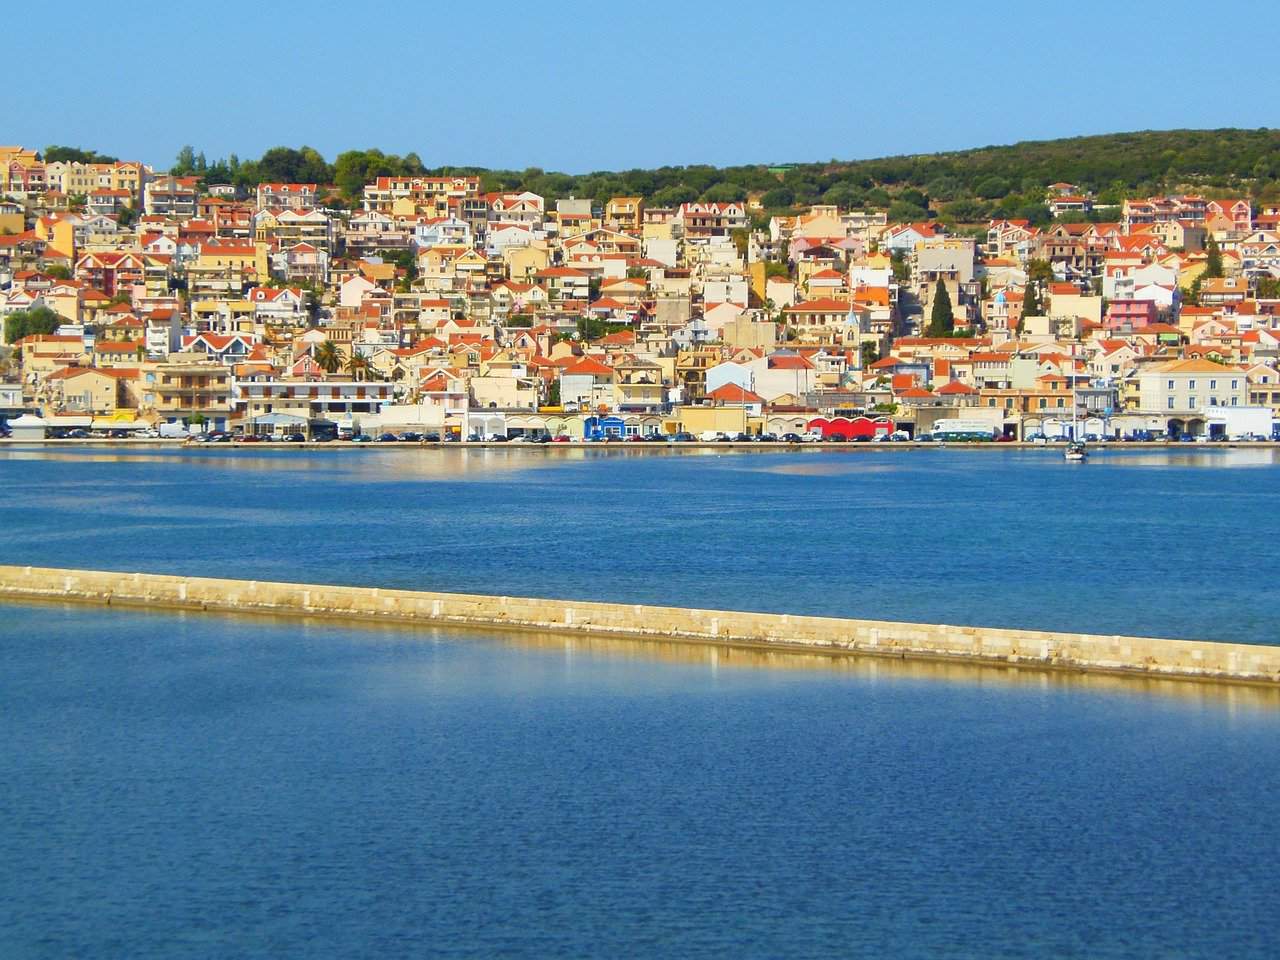 Argostoli, the capital of Kefalonia, at the south eastern part of the island.